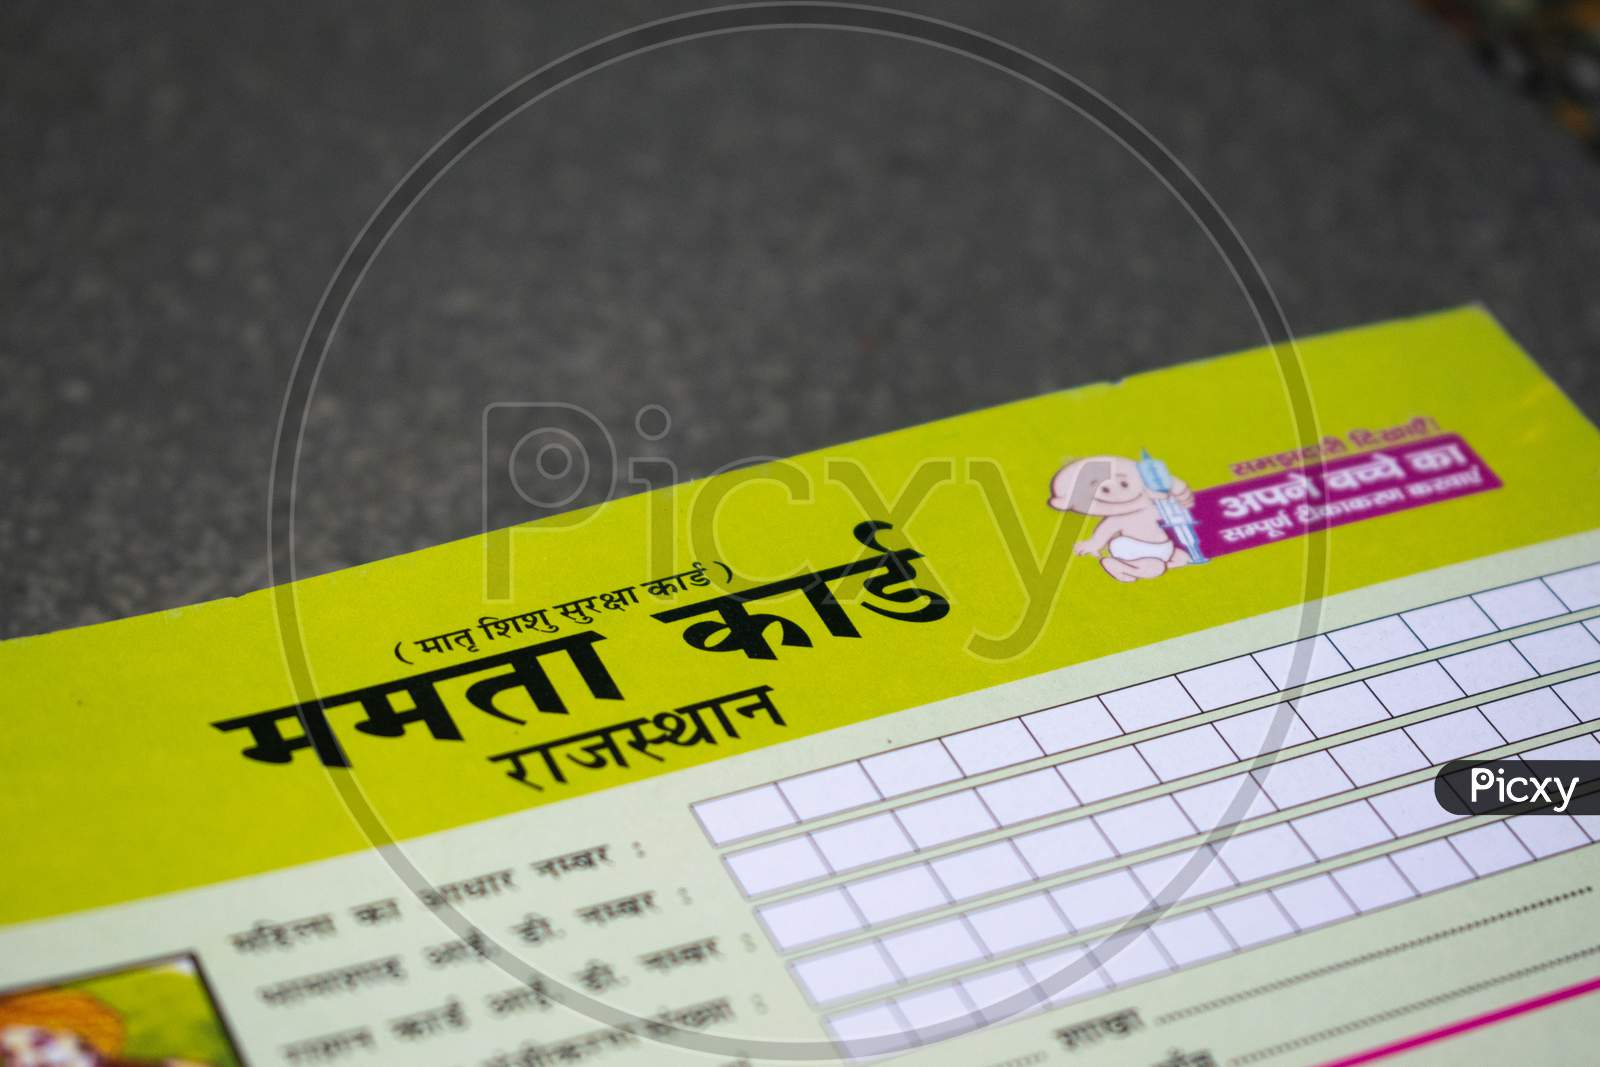 Mamta card by rajasthan government to give benefits to pregnant women and their child